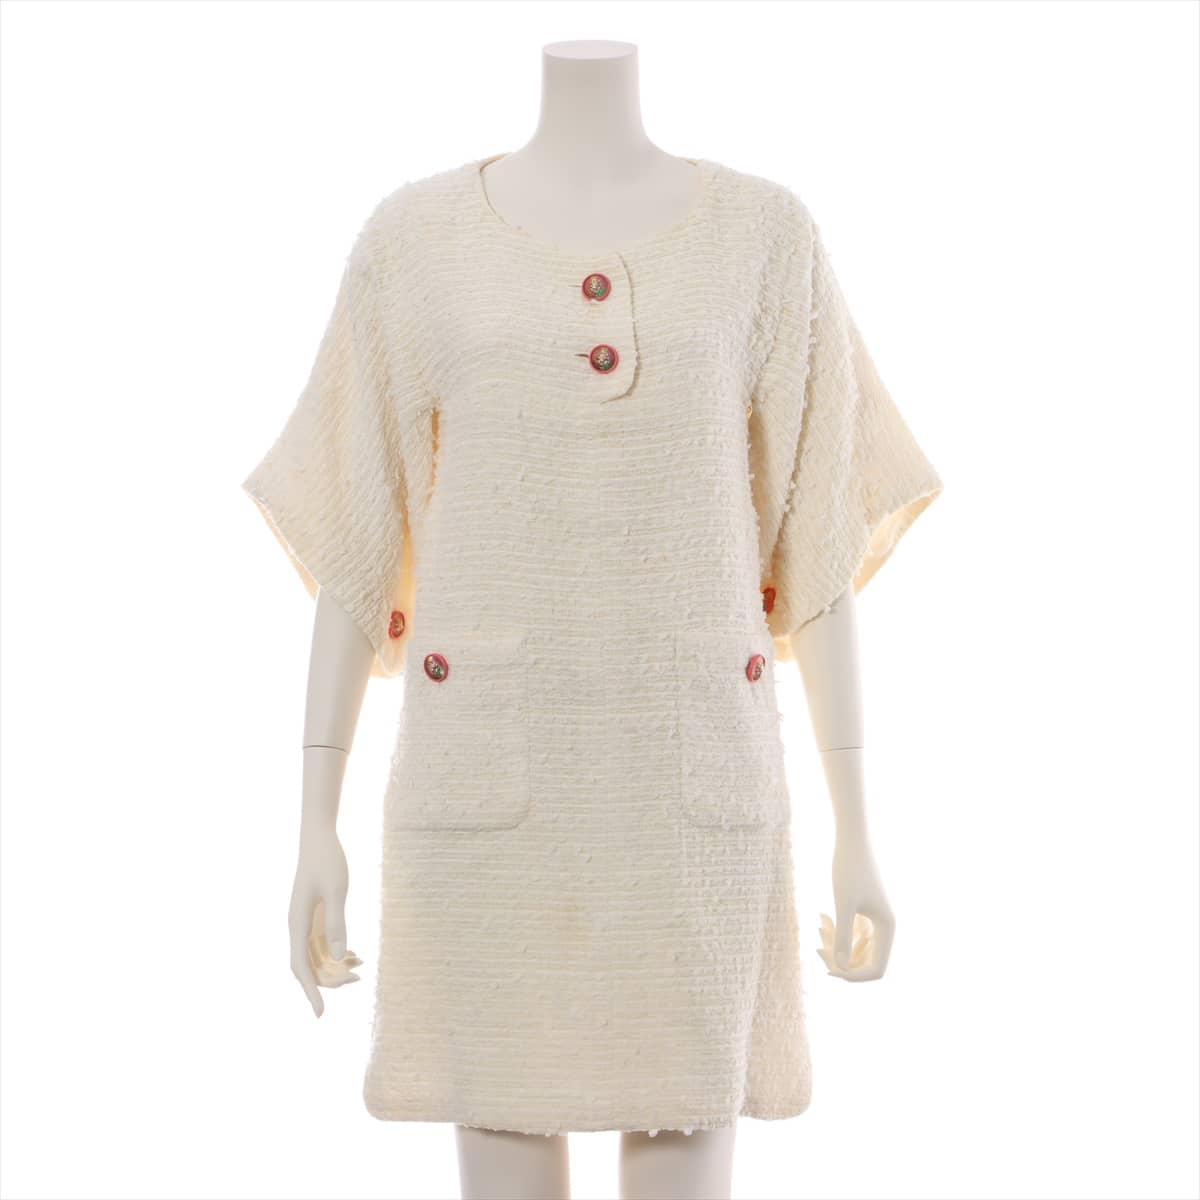 Chanel Coco Mark P56 Tweed Dress 36 Ladies' White  There are stains and odors all over the lining etc.